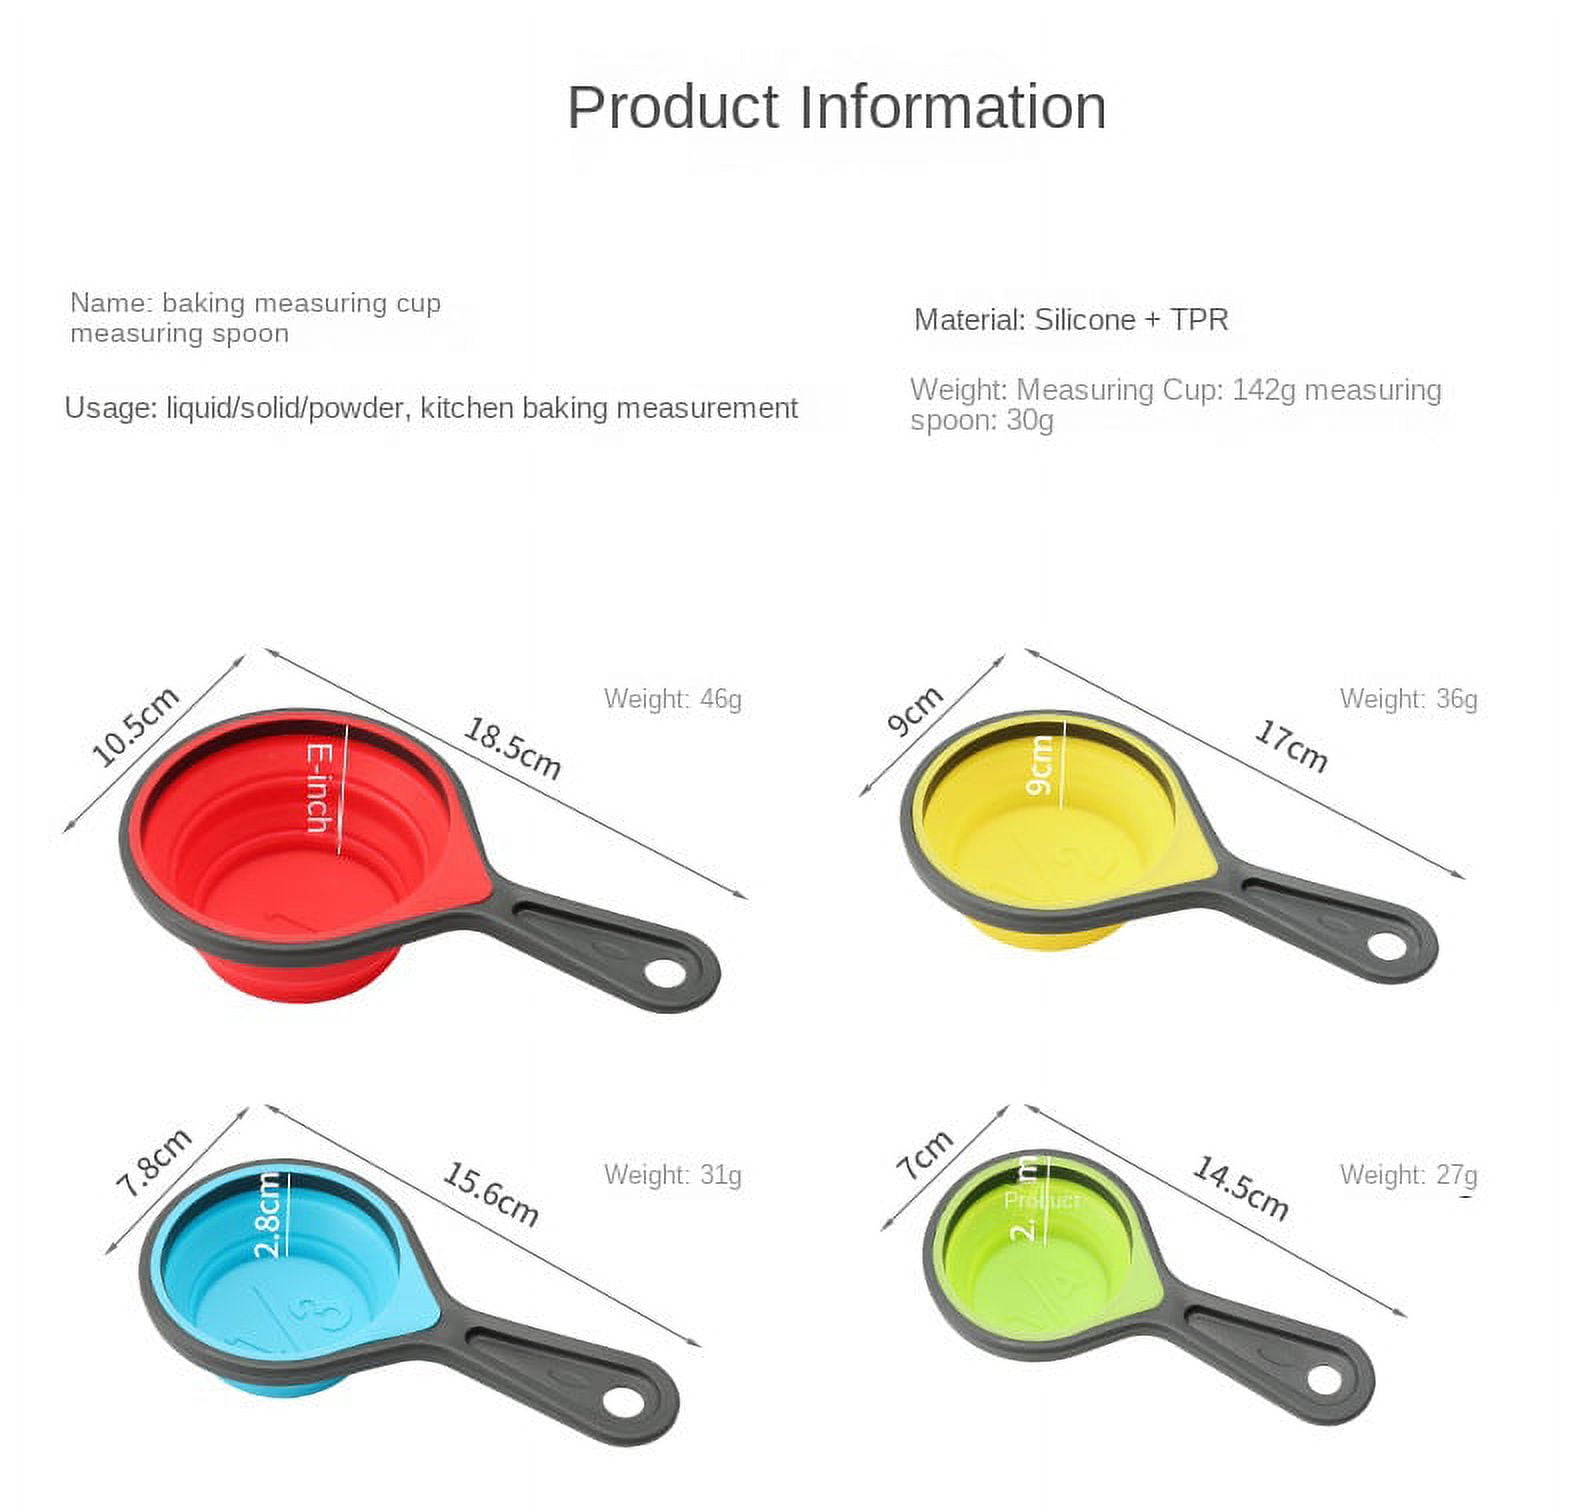 Collapsible Silicone Soft Measuring Cups and Measuring Spoons,8 pieces  Portable Food Grade Silicone Measurement Cup for Liquid & Dry Measuring  Baking